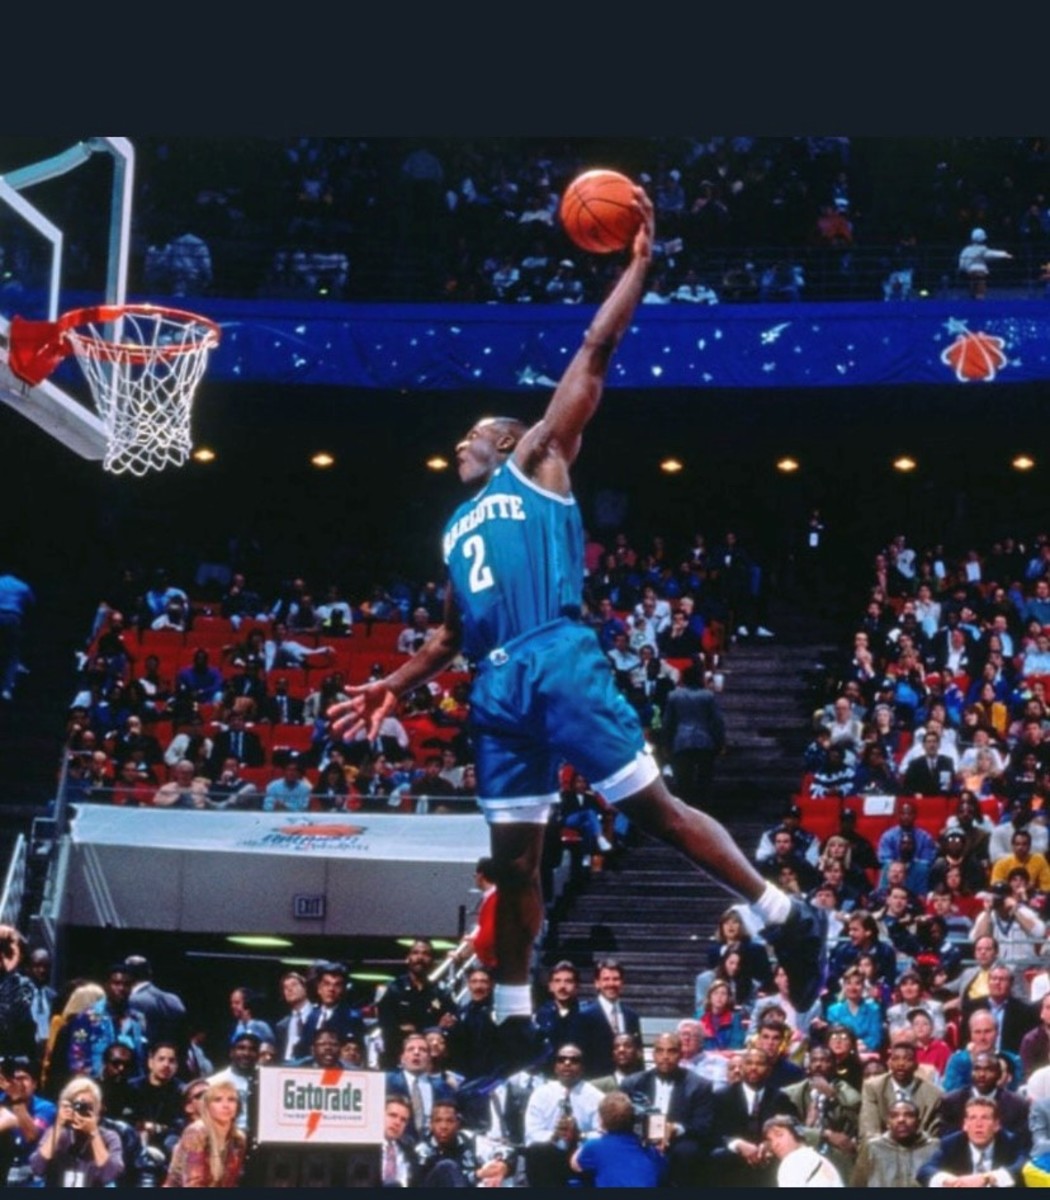 Larry Johnson in the 1992 Dunk Contest